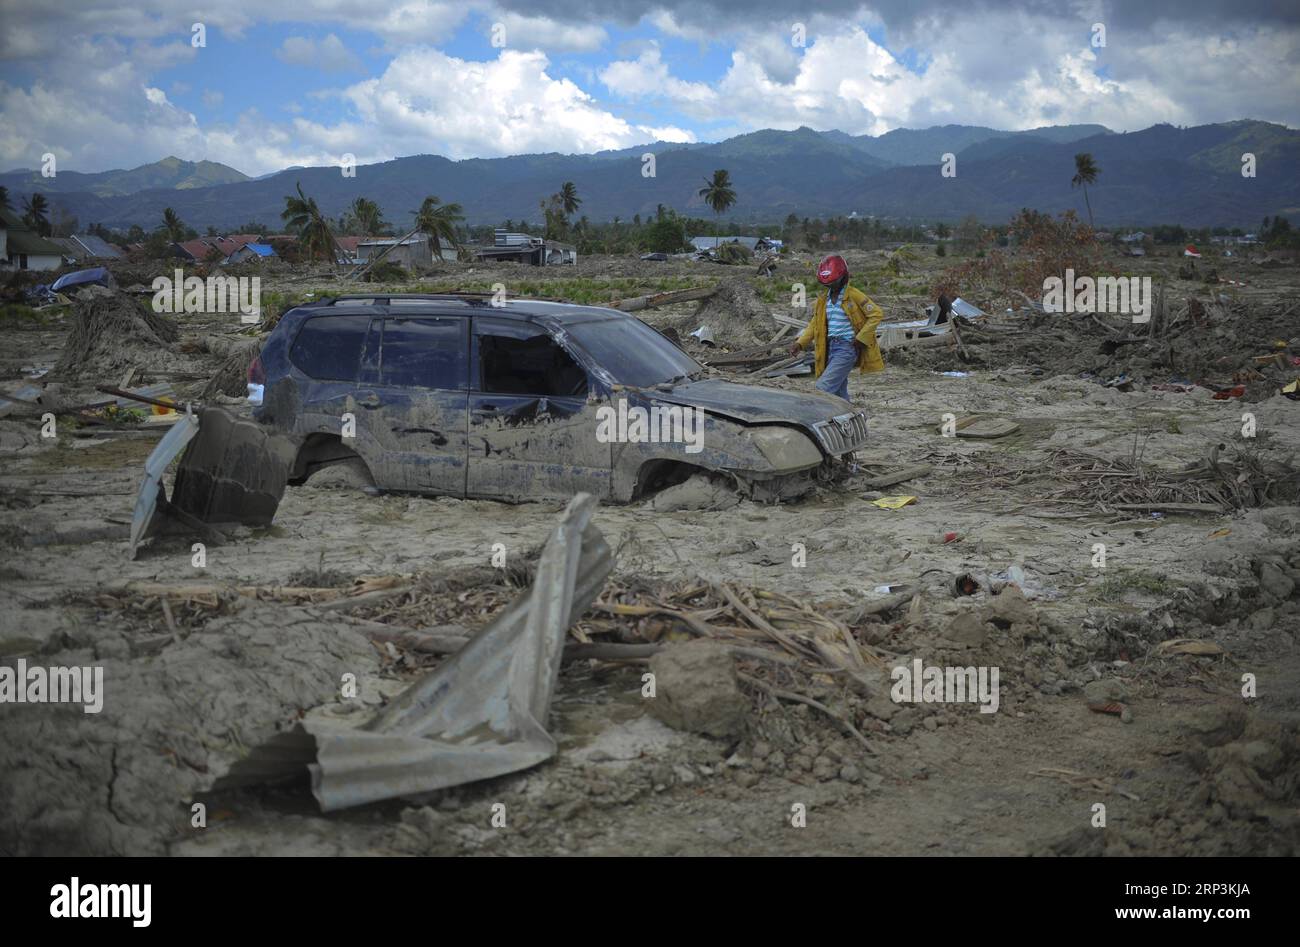 (181010) -- POSO, Oct. 10, 2018 -- A person walks on dried mud in Poso, Central Sulawesi Province, Indonesia, on Oct. 9, 2018. The earthquakes and the tsunami have killed at least 2,010 people, left over 5,000 others missing and triggered massive damage and a huge evacuation, according to the national disaster management agency. ) (yy) INDONESIA-POSO-EARTHQUAKE AND TSUNAMI-AFTERMATH Zulkarnain PUBLICATIONxNOTxINxCHN Stock Photo